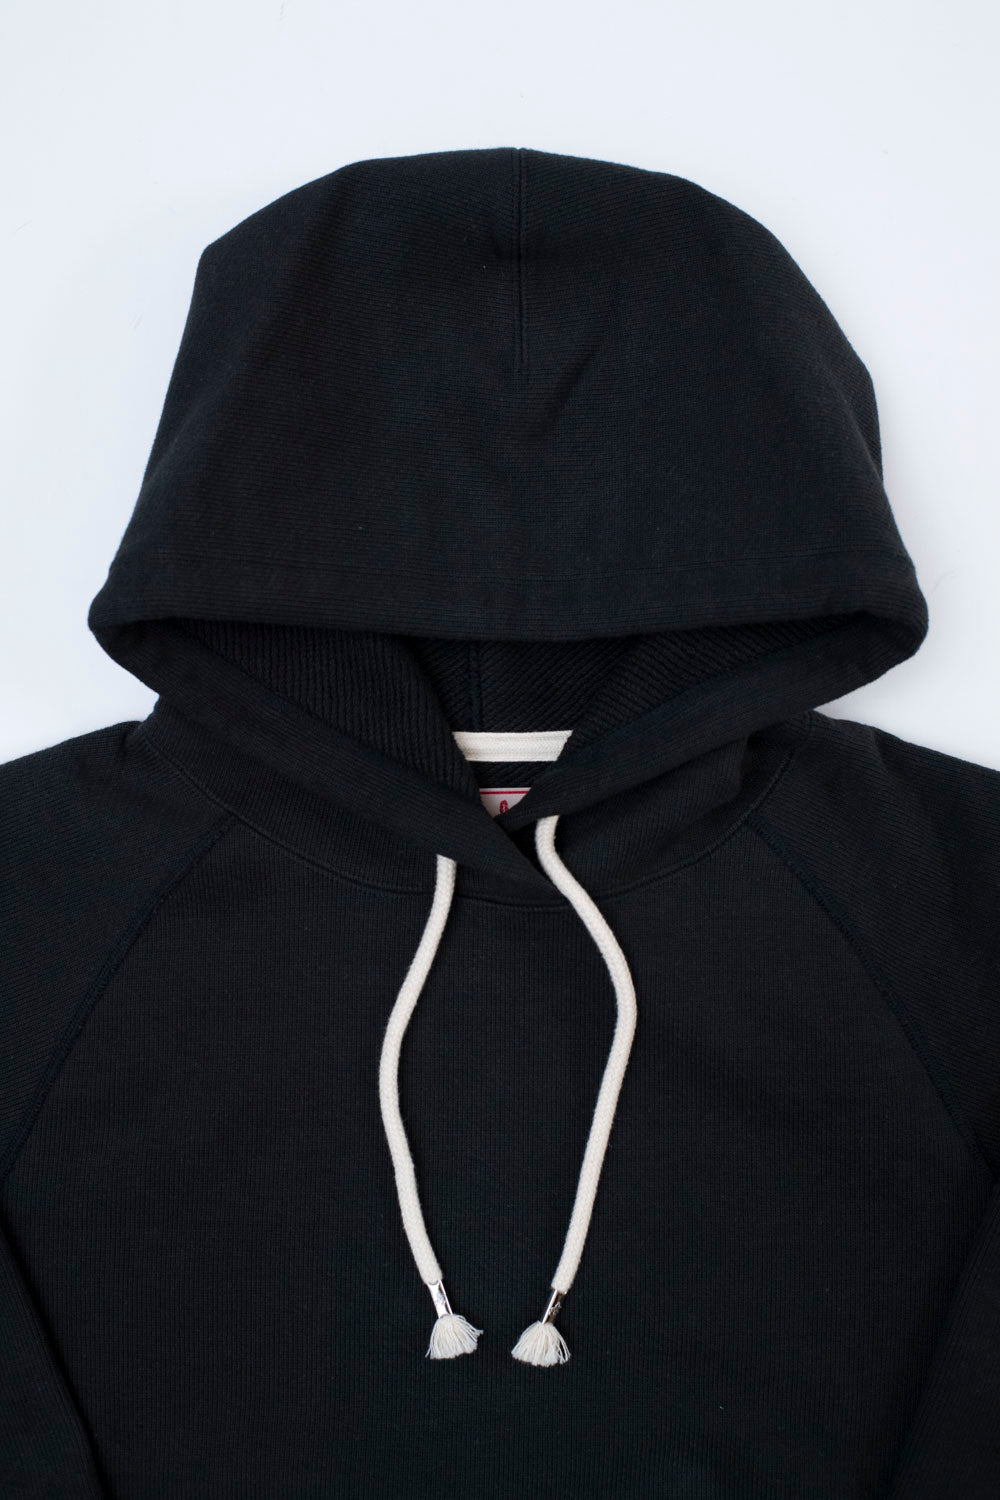 Pullover Hoodie 701gsm Double Heavyweight French Terry - Sumi Black